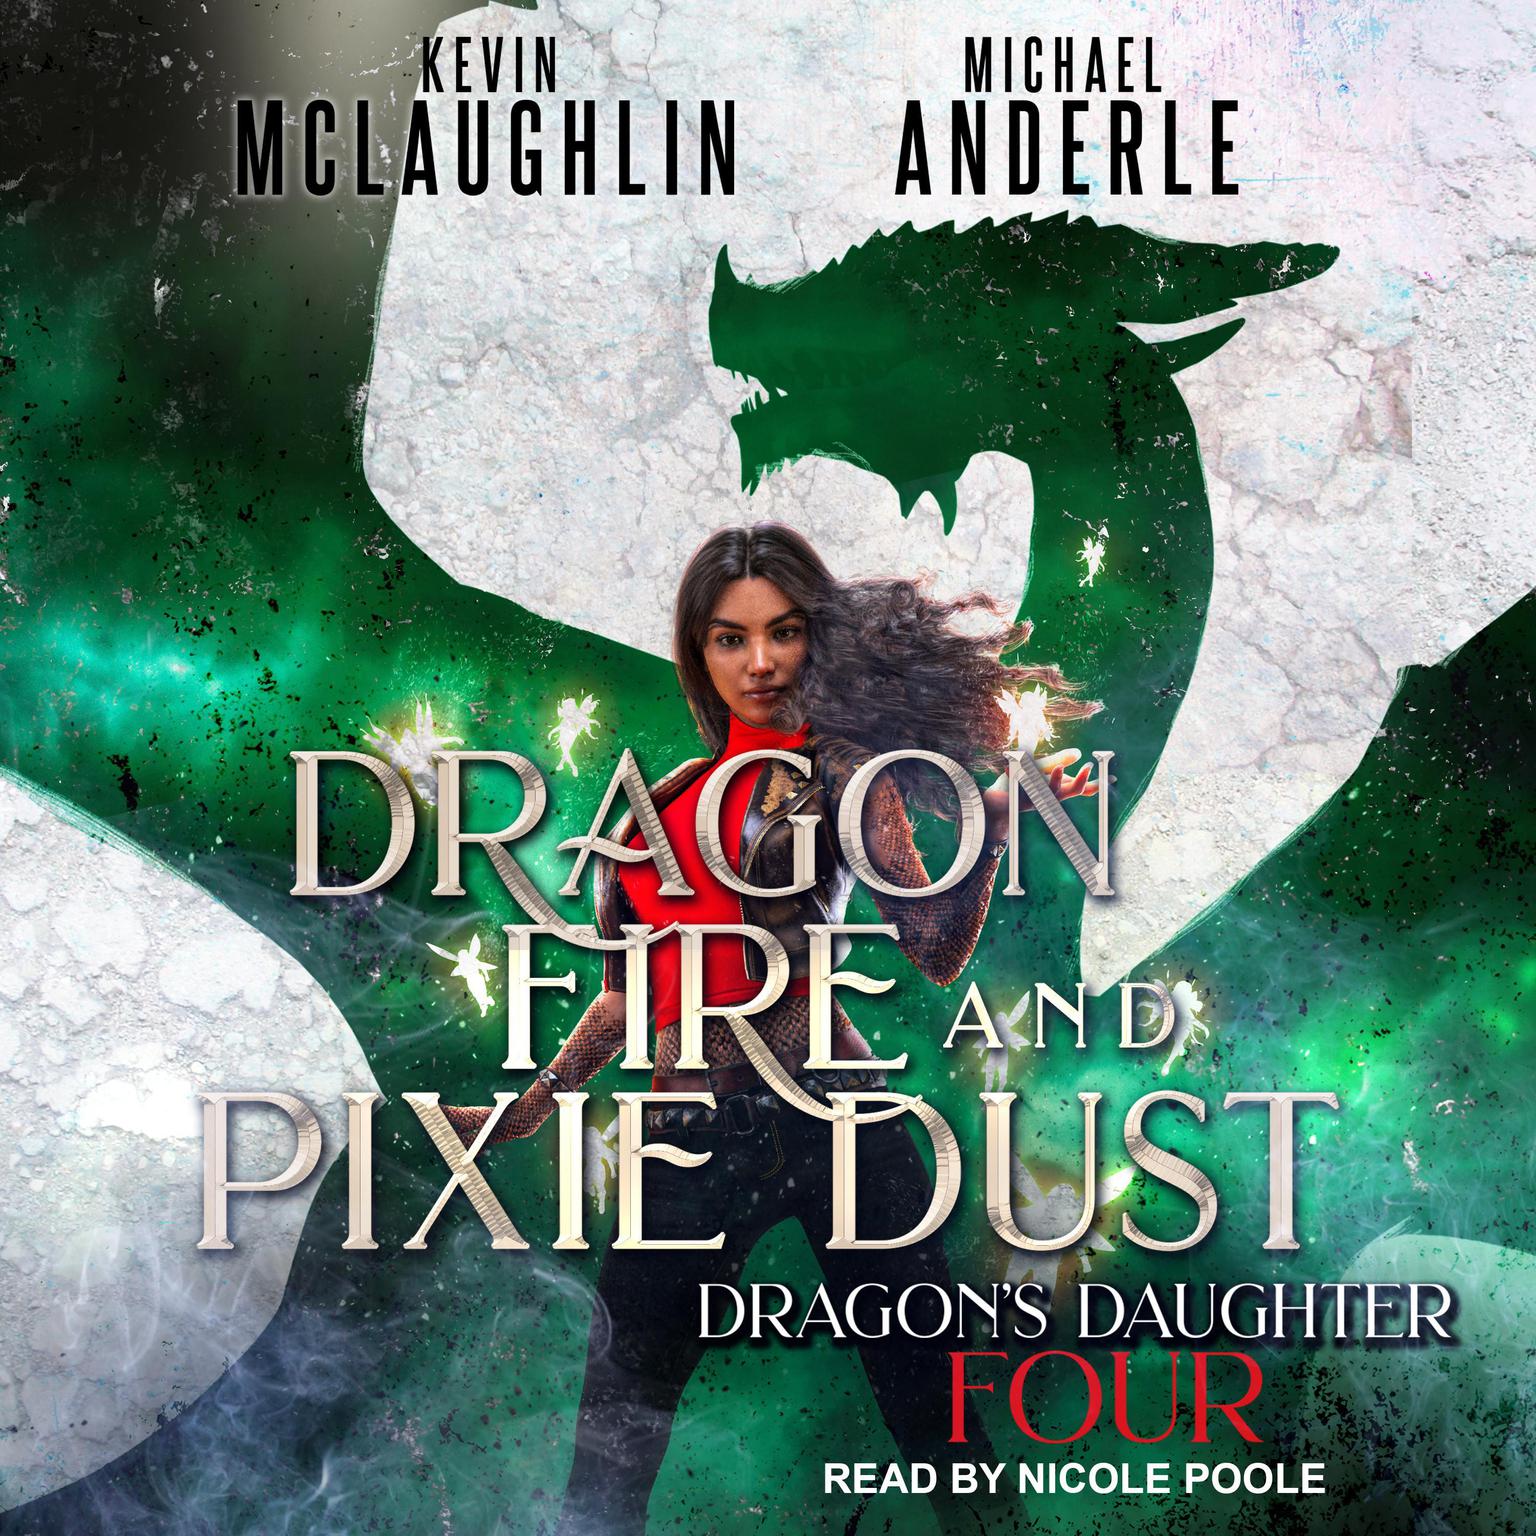 Dragon Fire and Pixie Dust Audiobook, by Michael Anderle